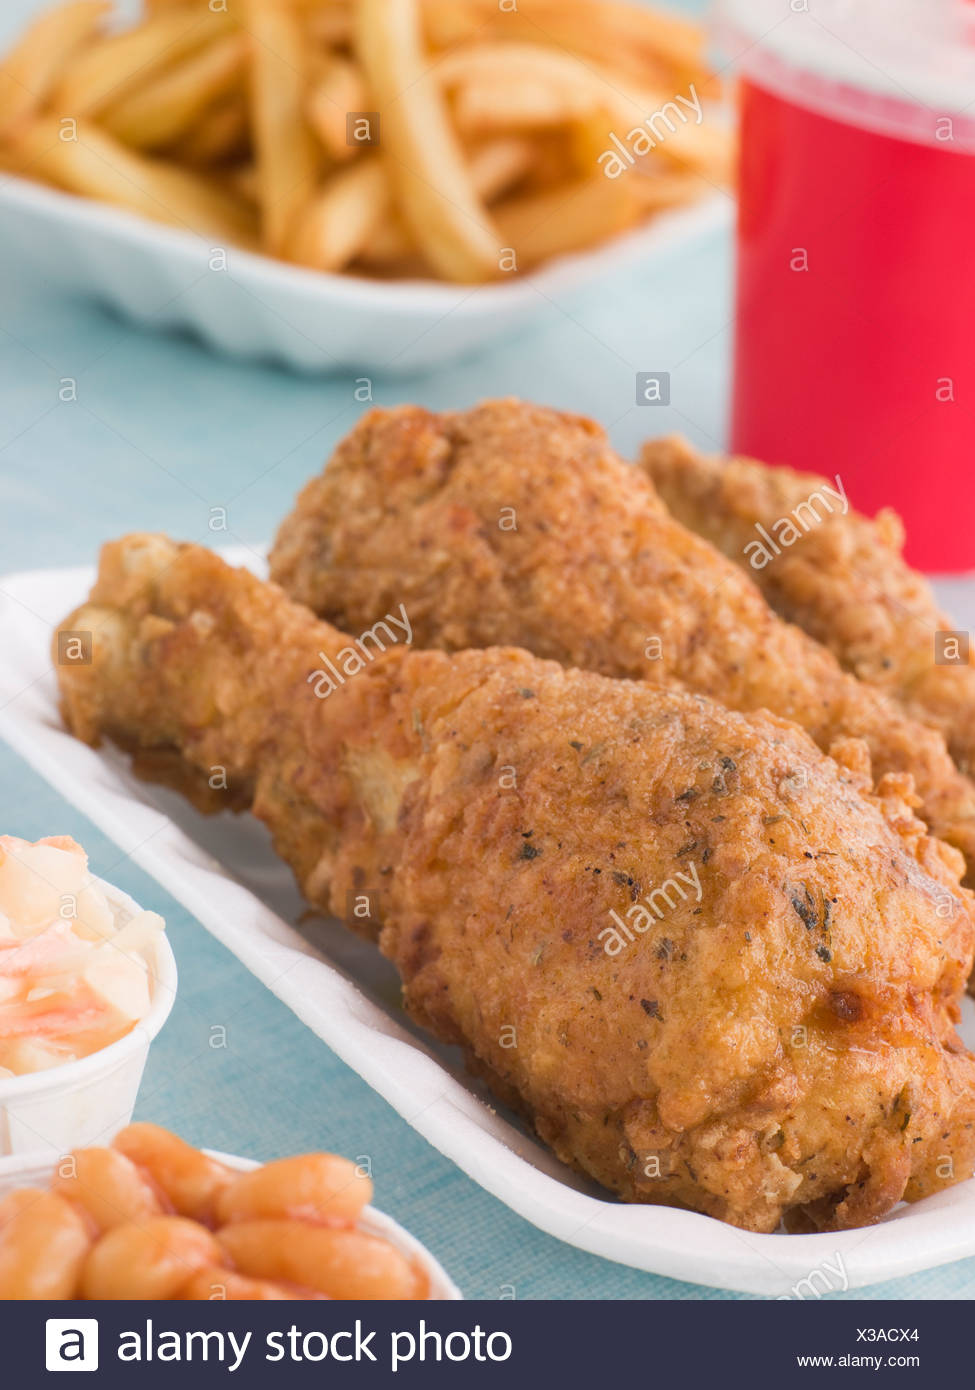 Takeaway Chicken And Chips High Resolution Stock Photography and Images ...